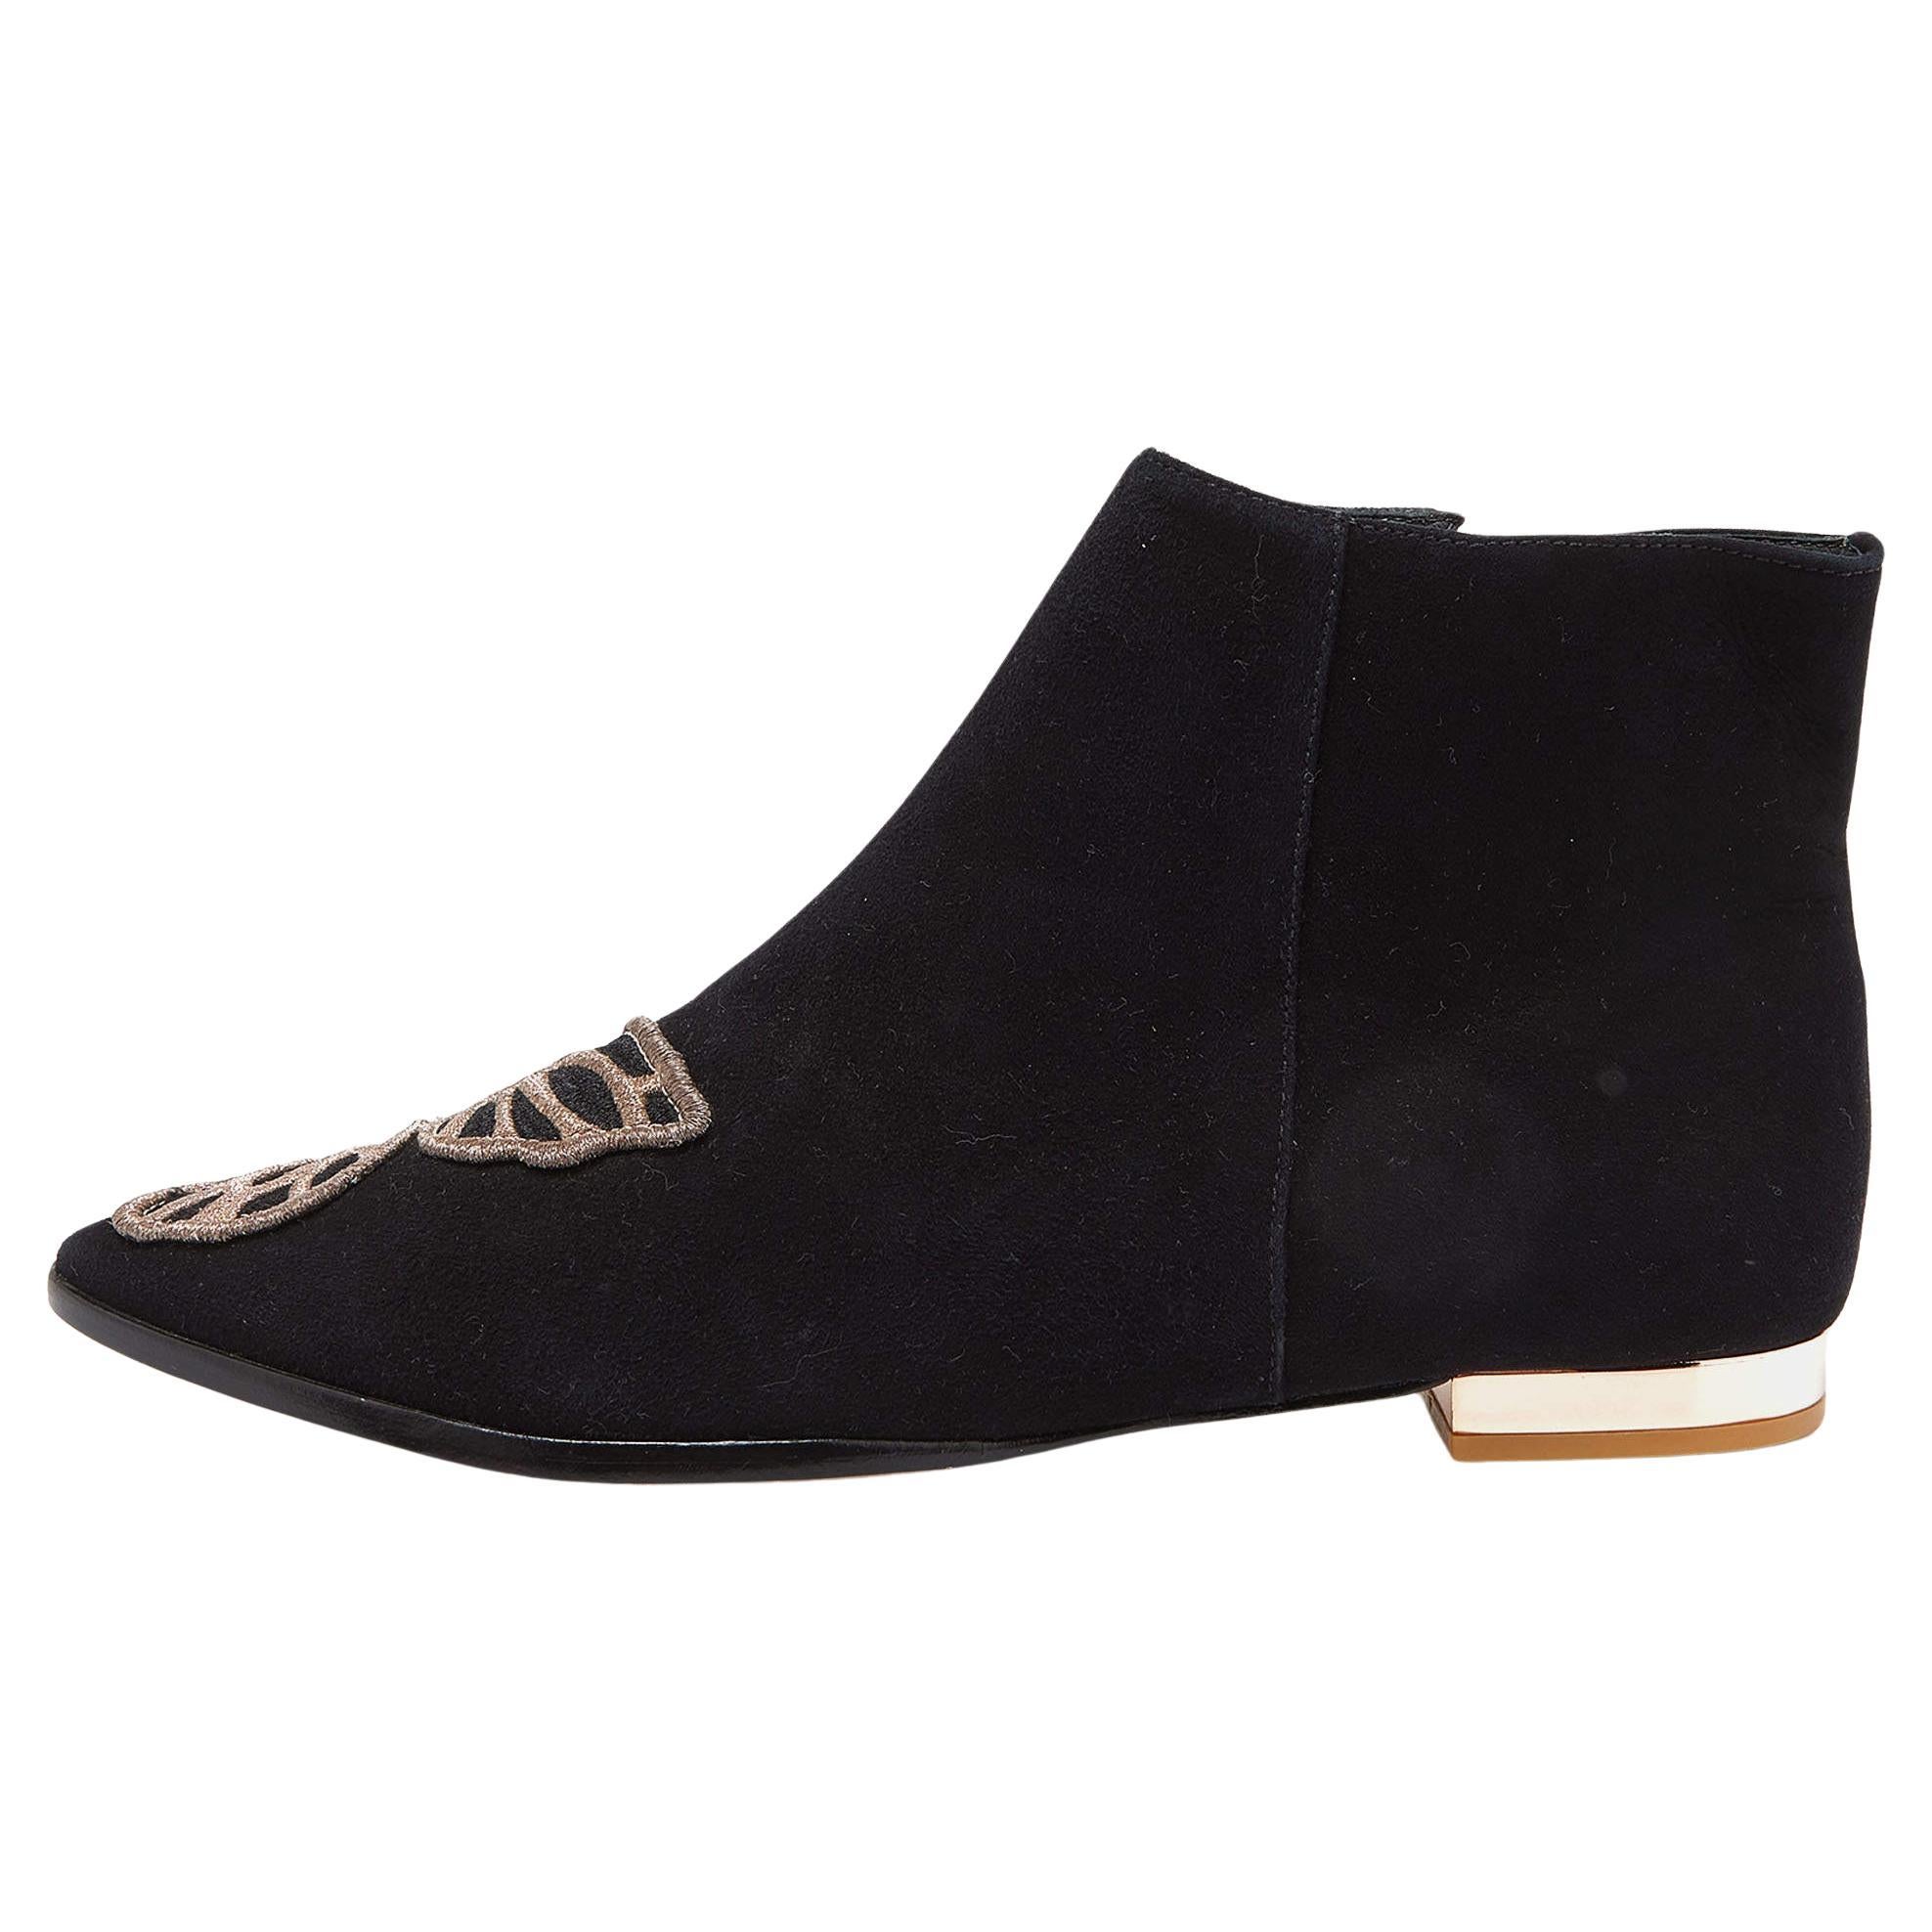 Sophia Webster Black Suede Karina Butterfly Ankle Boots Size 39 For Sale